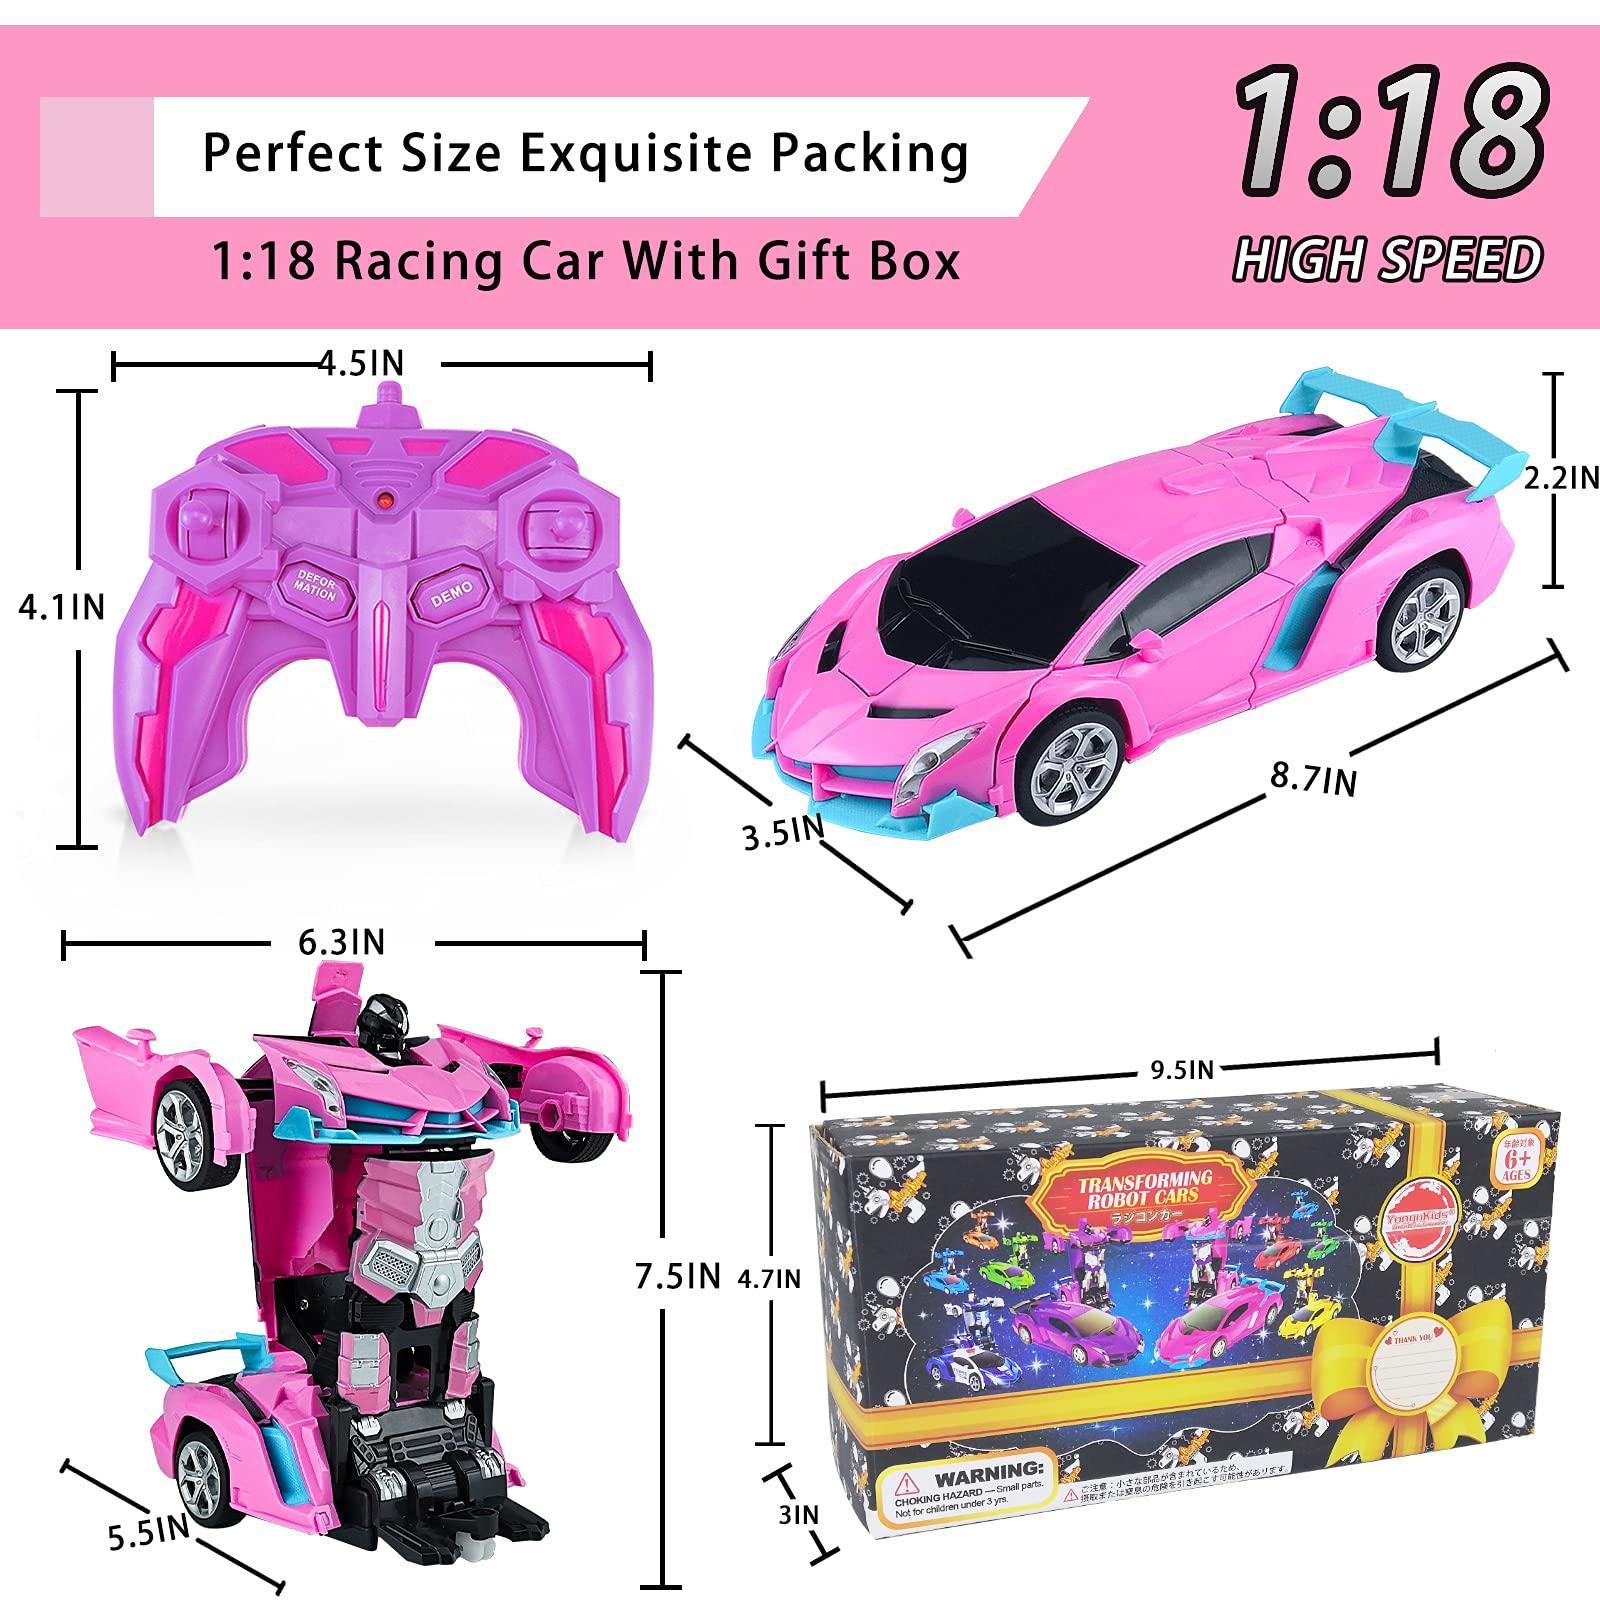 Pink Rc Car:  The pink RC car: A unique and durable miniature car with advanced features.